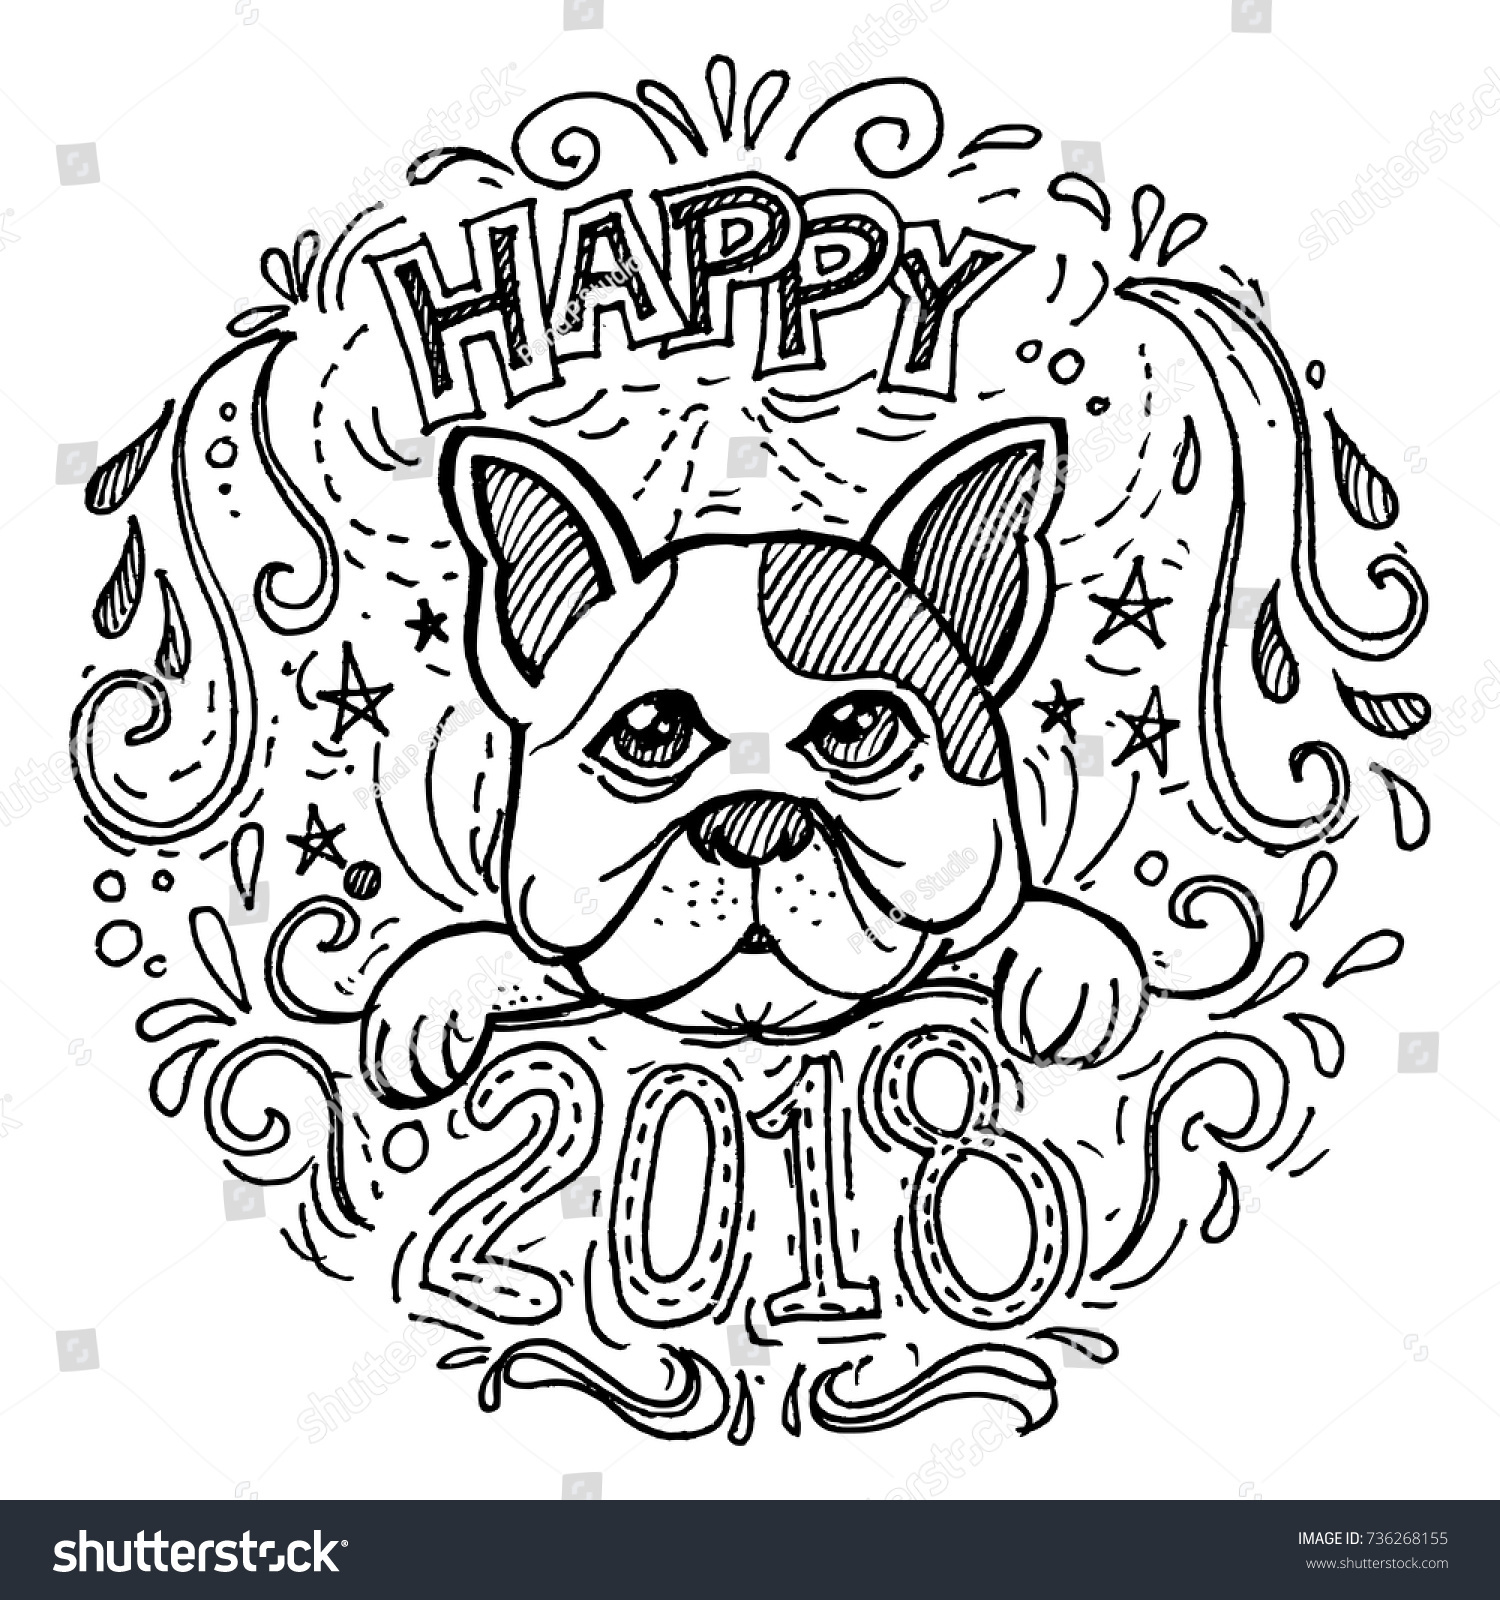 Happy New Year 2018 Created Doodling Stock Vector Royalty Free